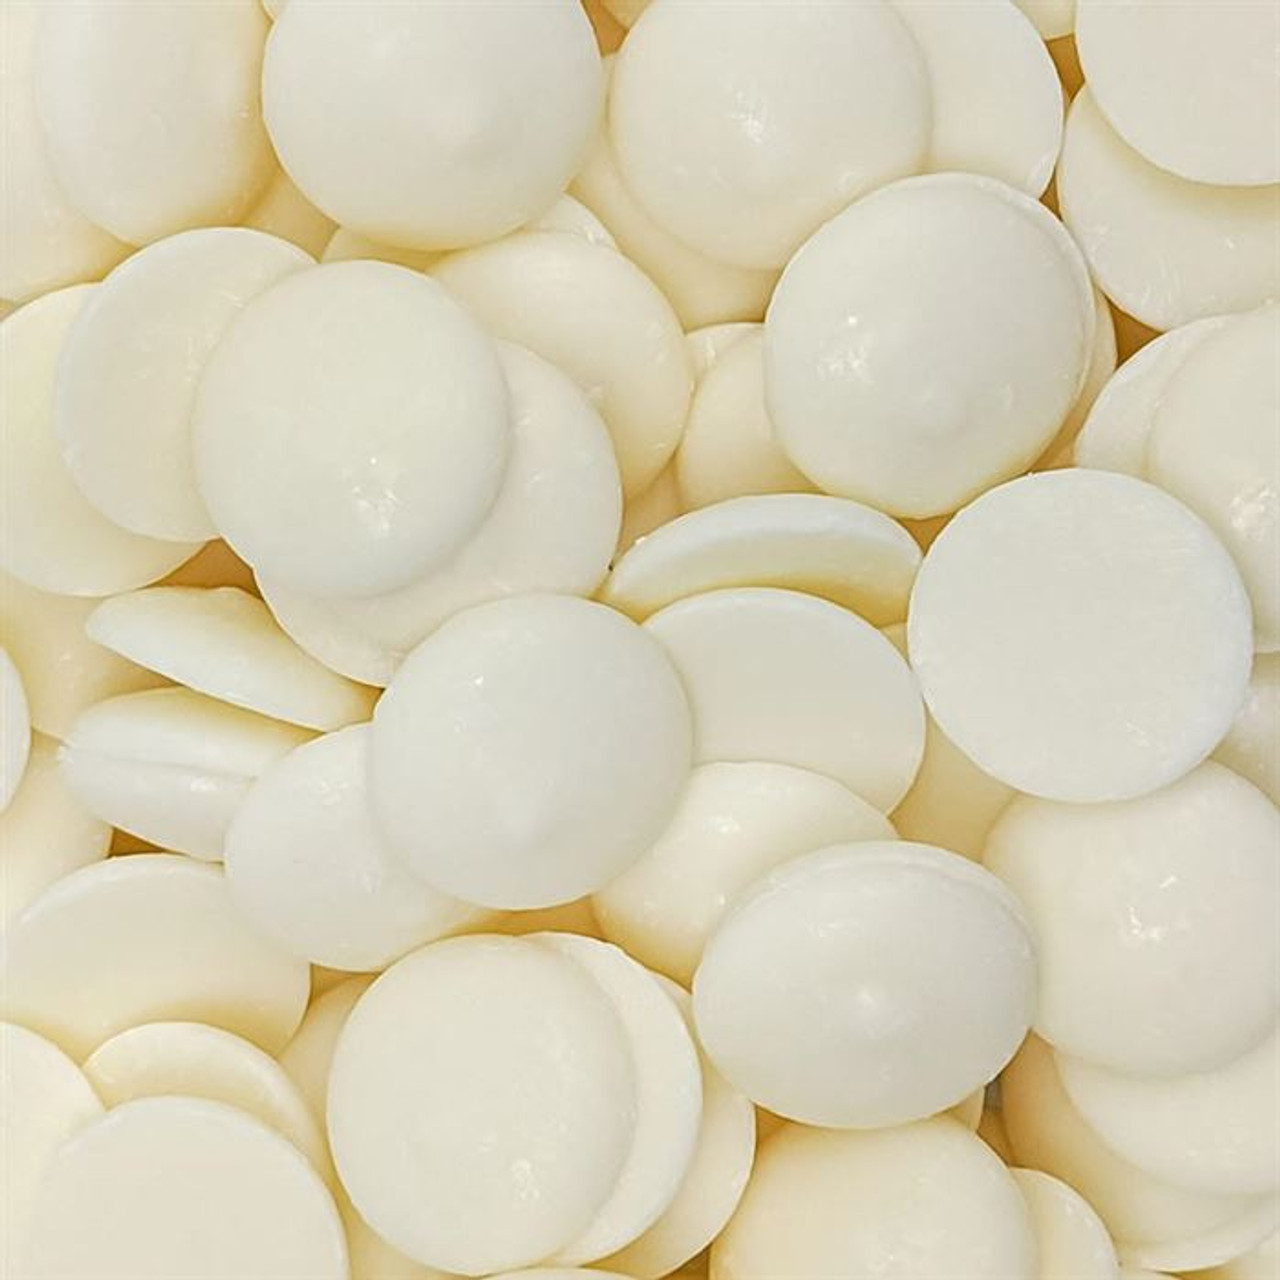 Merckens White Candy Coating Wafers - 1 lb › Sugar Art Cake & Candy Supplies